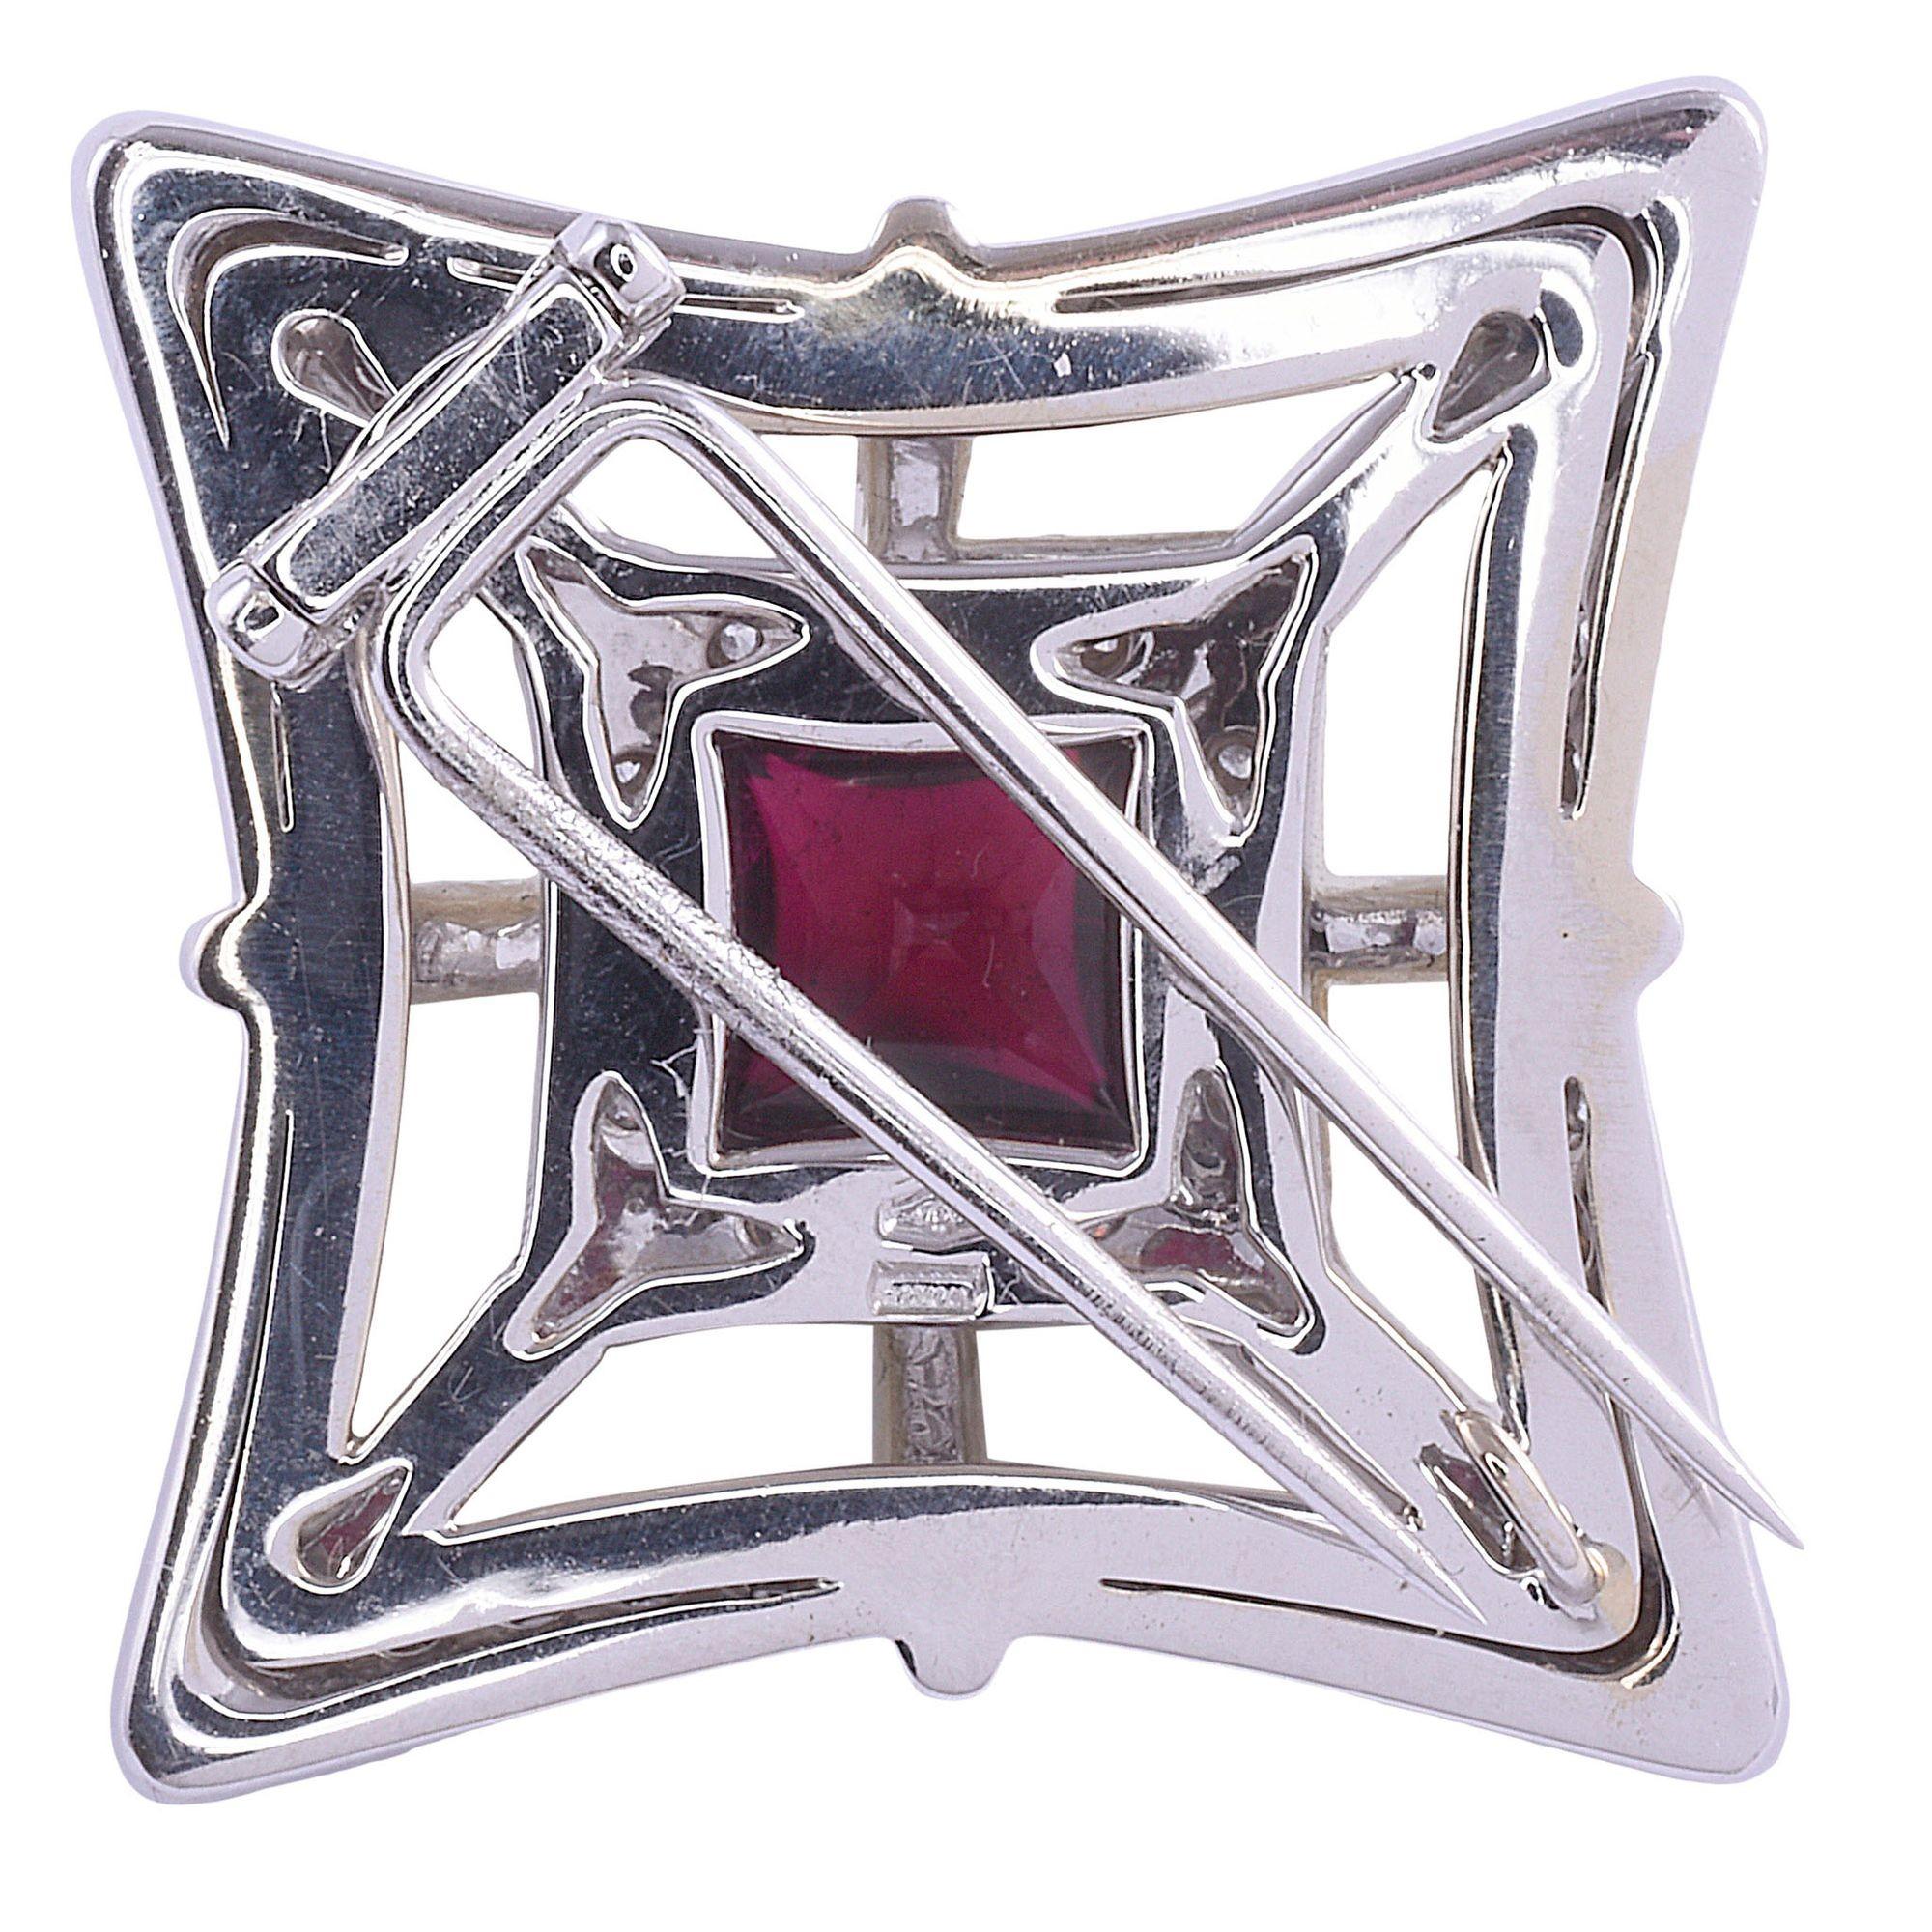 Estate Italian Oro Trend rubellite tourmaline 18K white gold pin or pendant. This brooch by Oro Trend is crafted in 18 karat white gold and may also be worn as a pendant. The Oro Trend pin features a rubellite tourmaline center set above a large